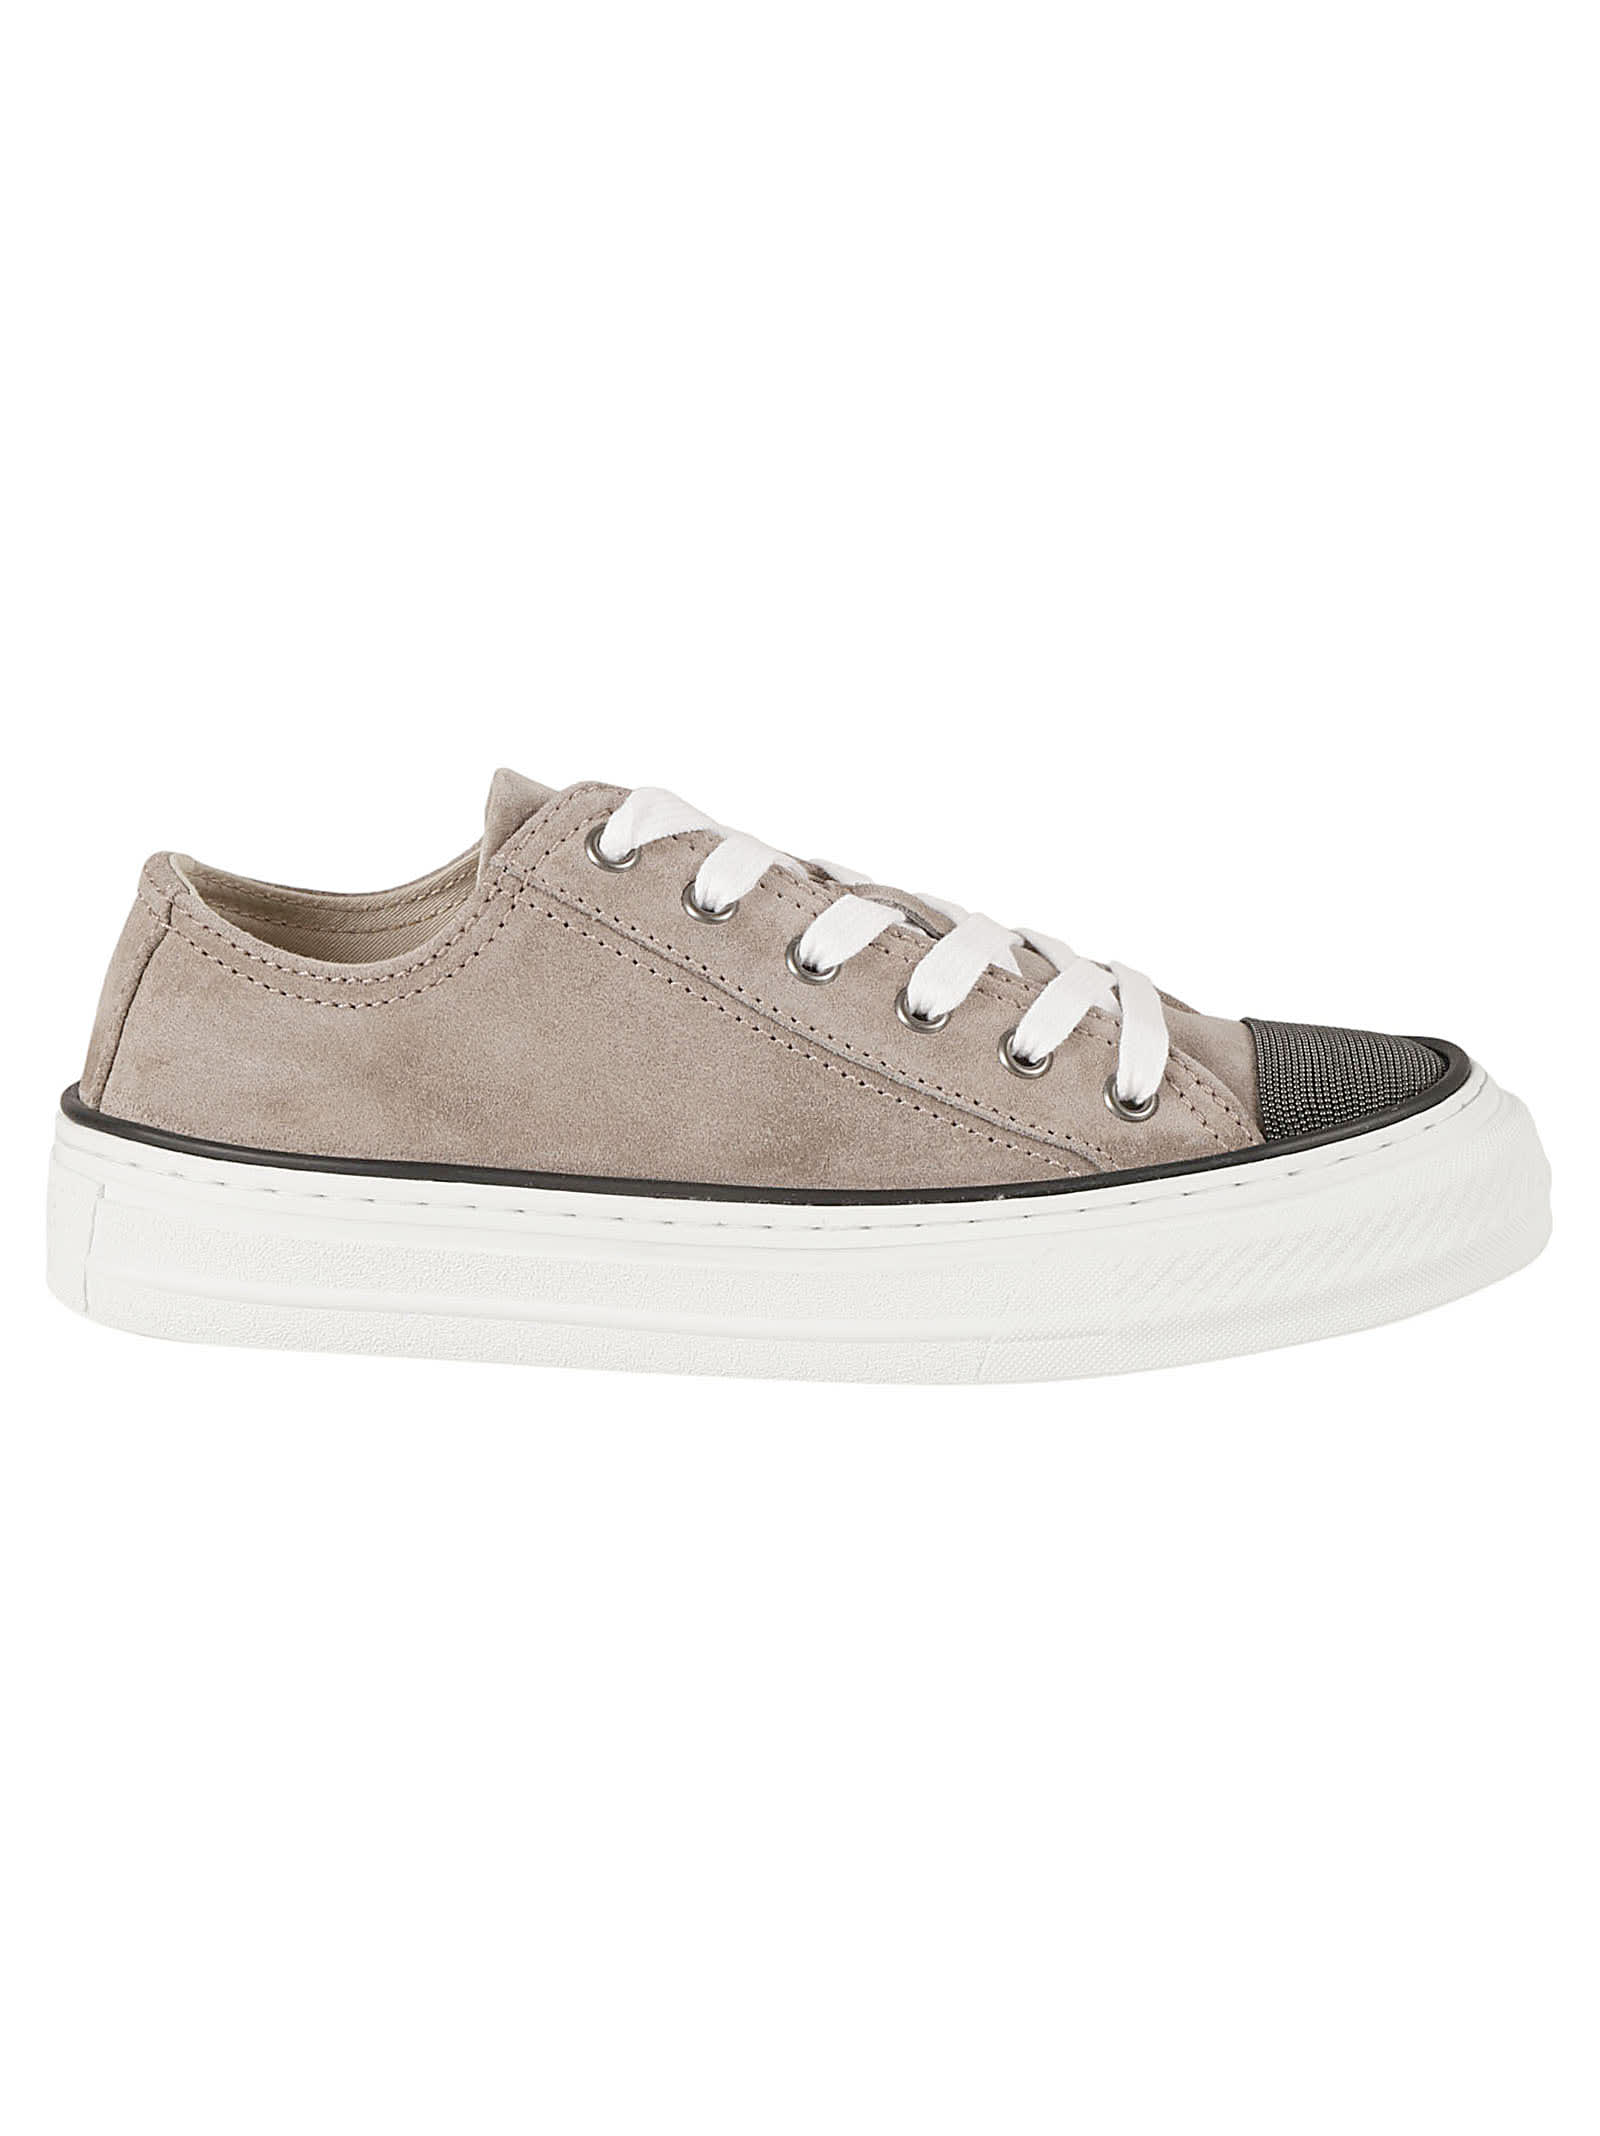 Brunello Cucinelli Softy Velour Pair Of Sneakers In Pietra Serena